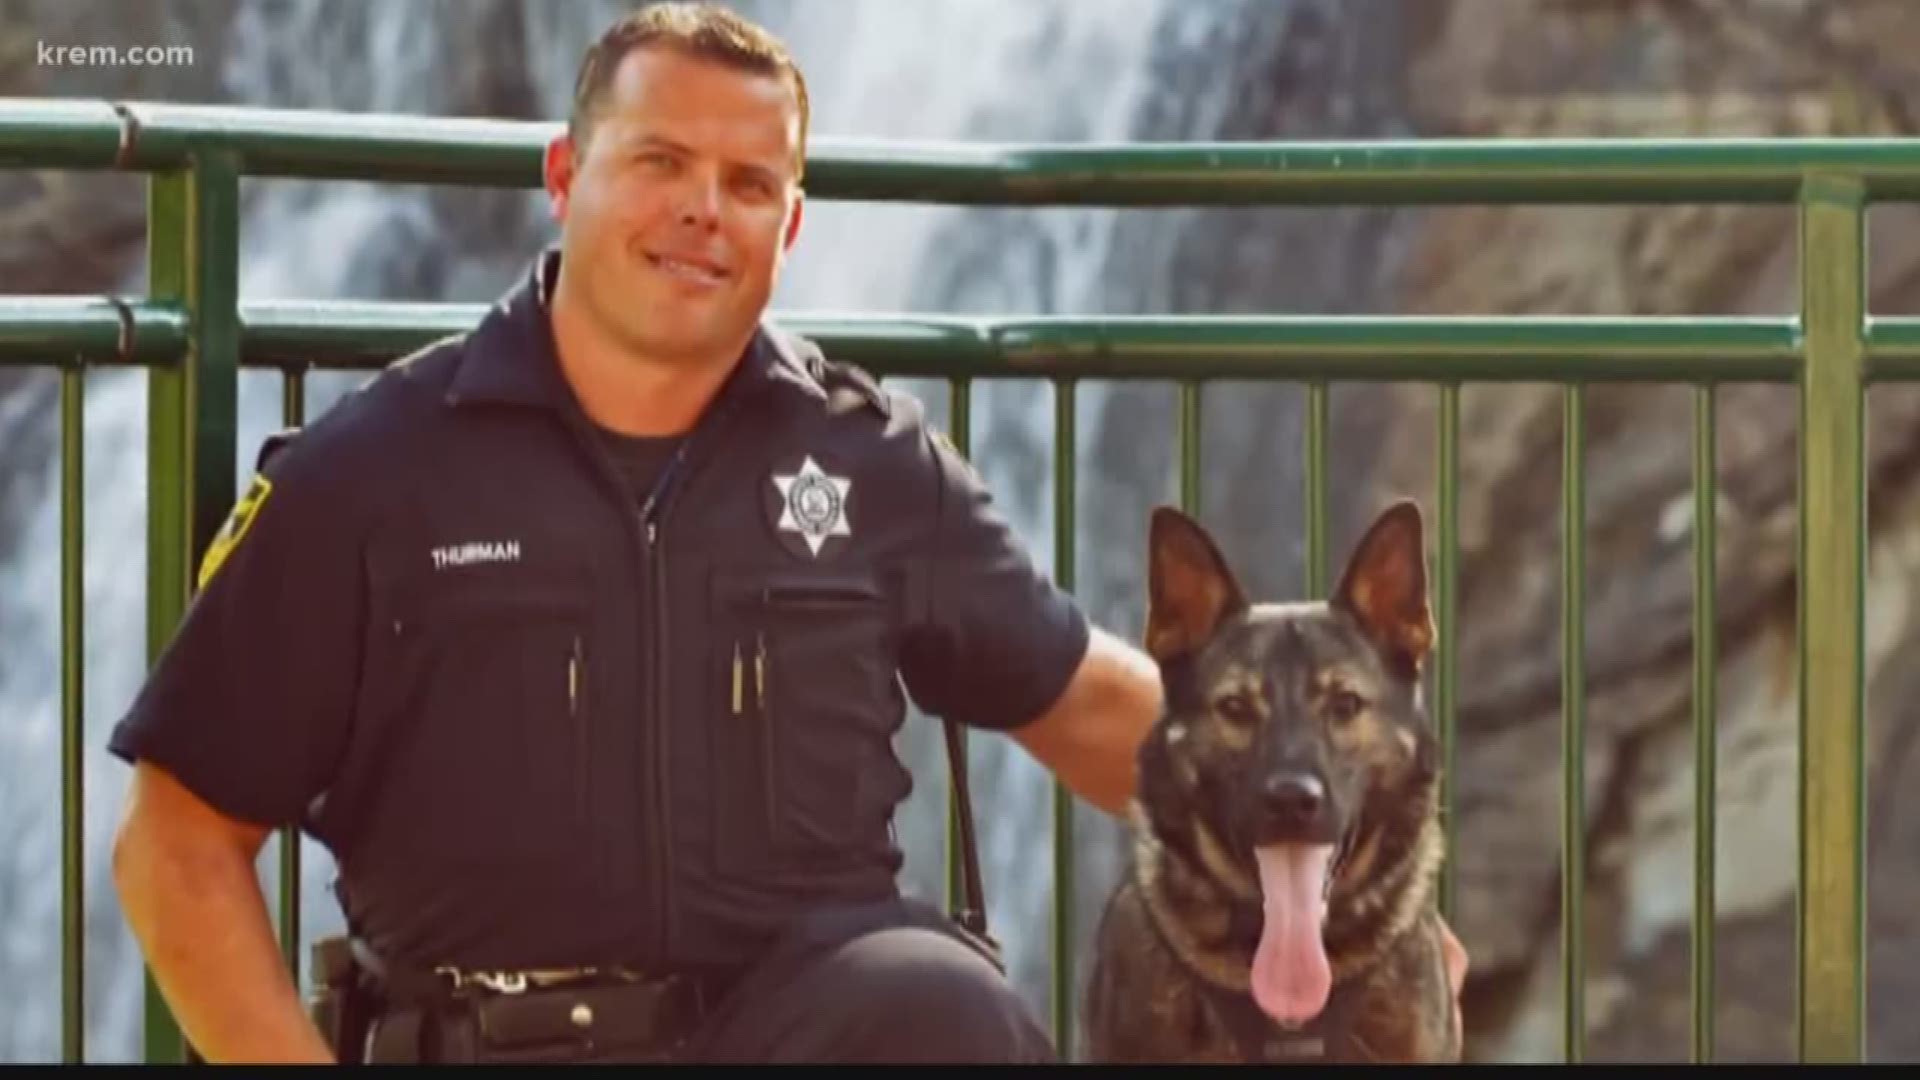 K-9 Laslo first spent the night in a veterinarian's office in early January, where he had four seizures. His seizures returned in March and again in May. Spokane County Sheriff's Corporal Jeff Thurman said Laslo passed around 3:15 a.m. on Friday.